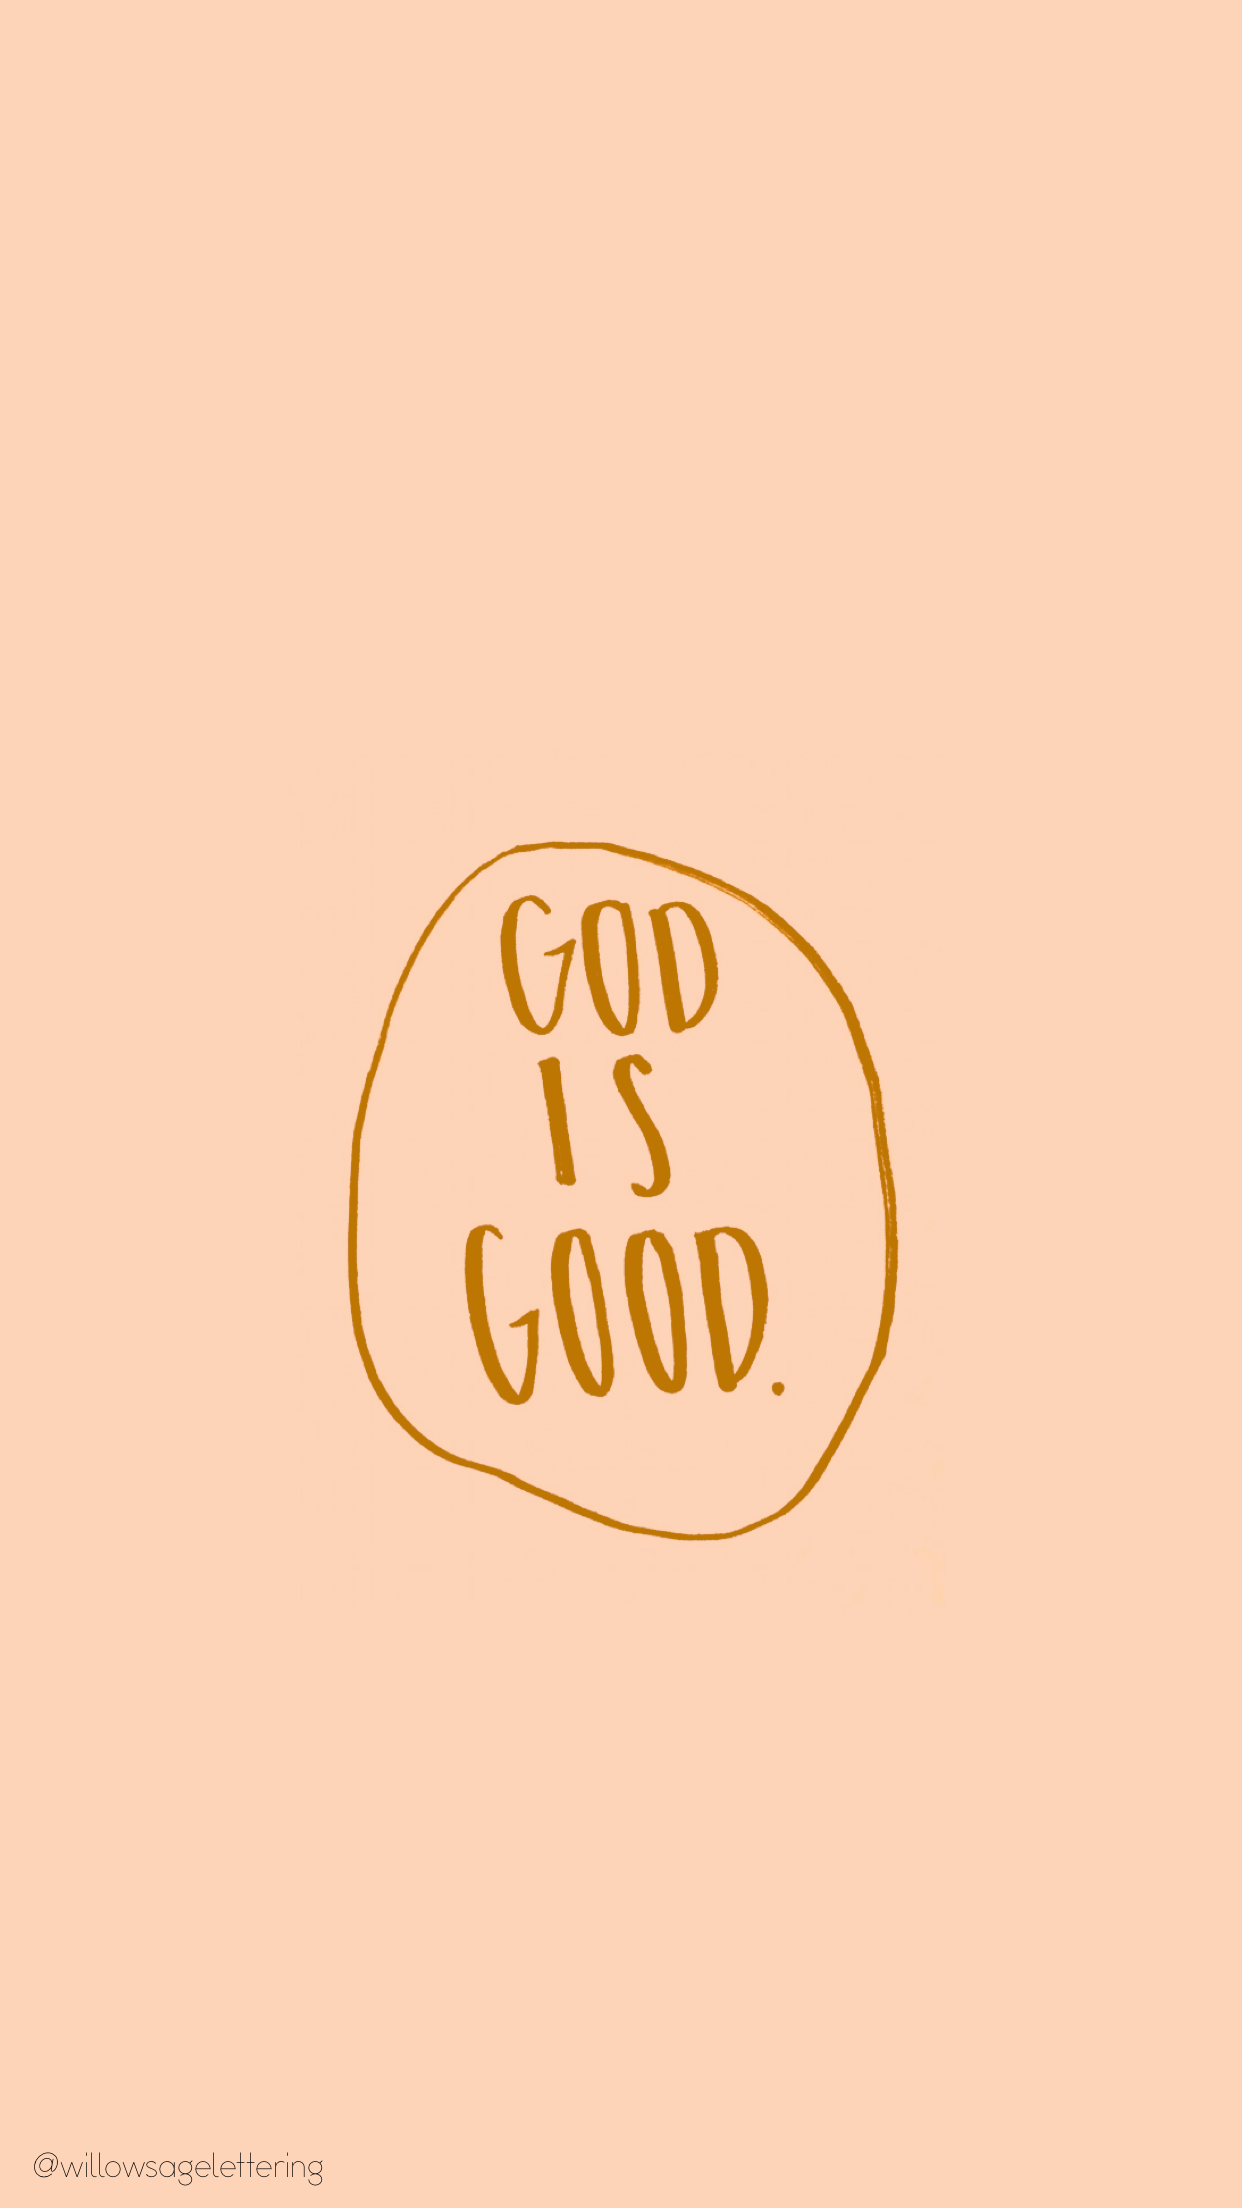 God is good wallpaper phone background with a quote - Christian, christian iPhone